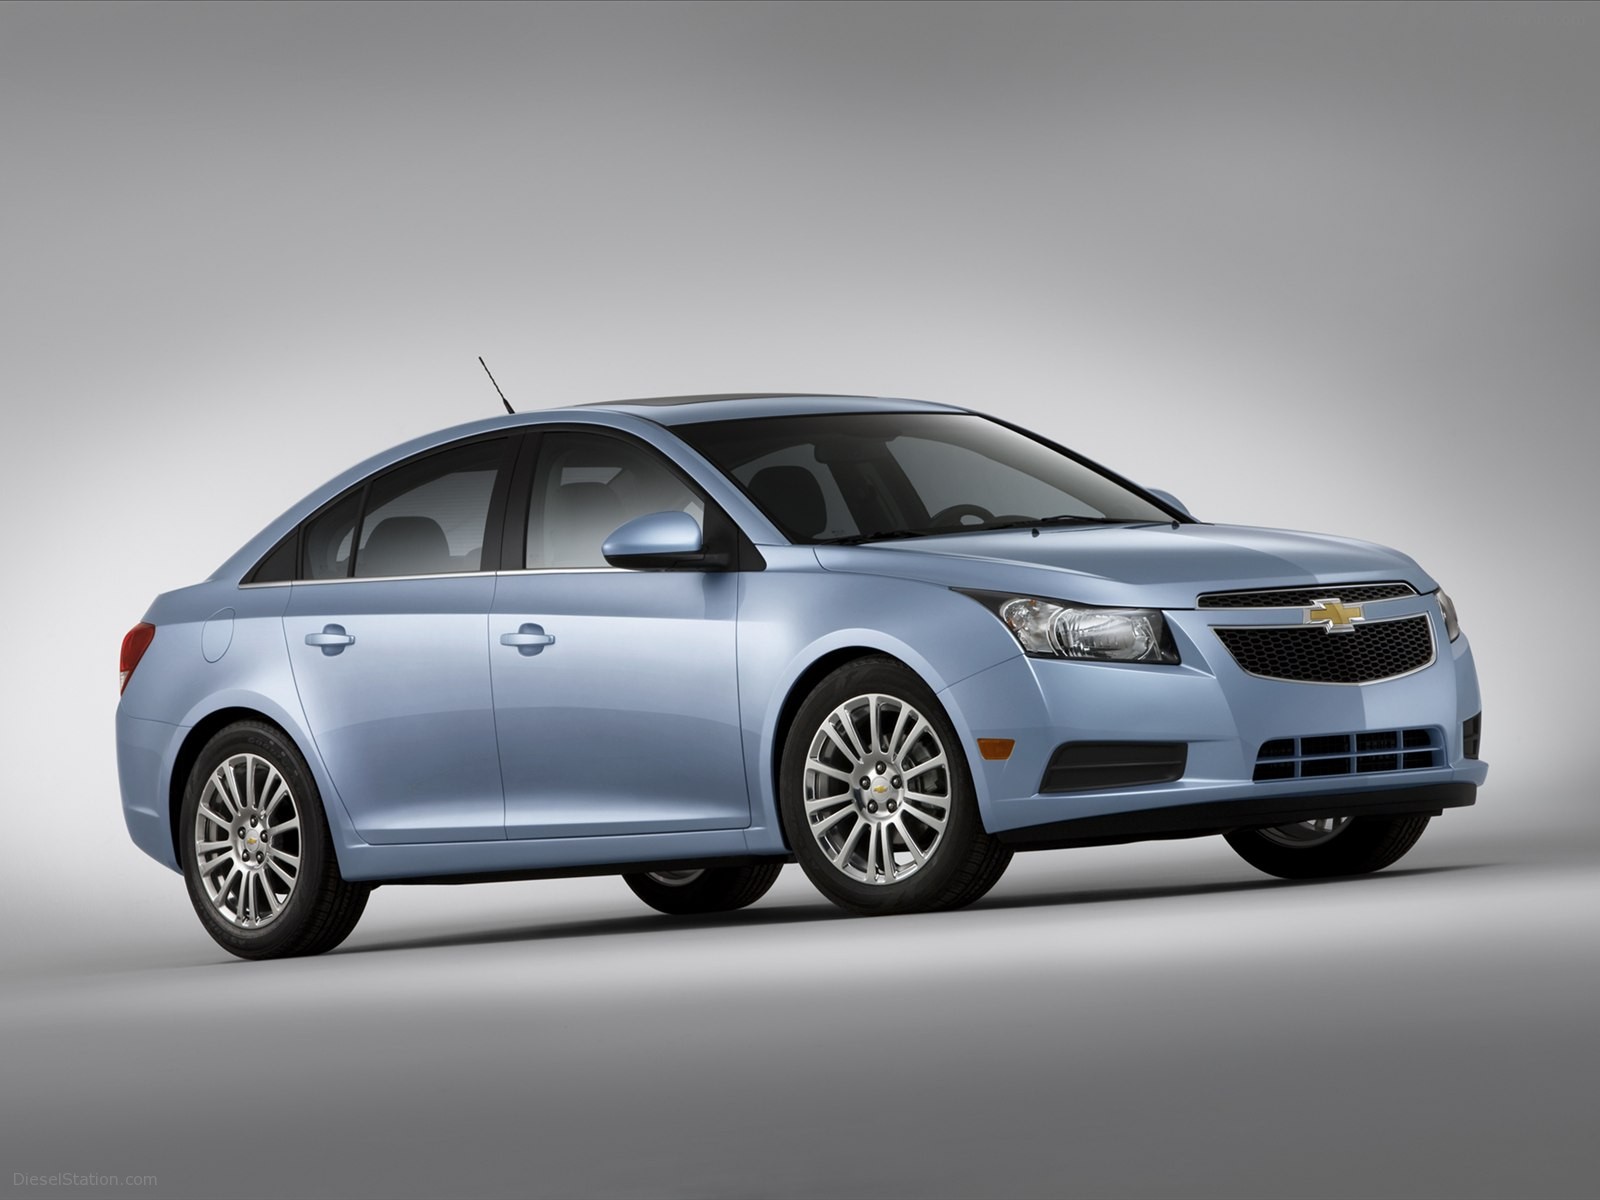 Chevrolet Cruze Exotic Car Picture Of Diesel